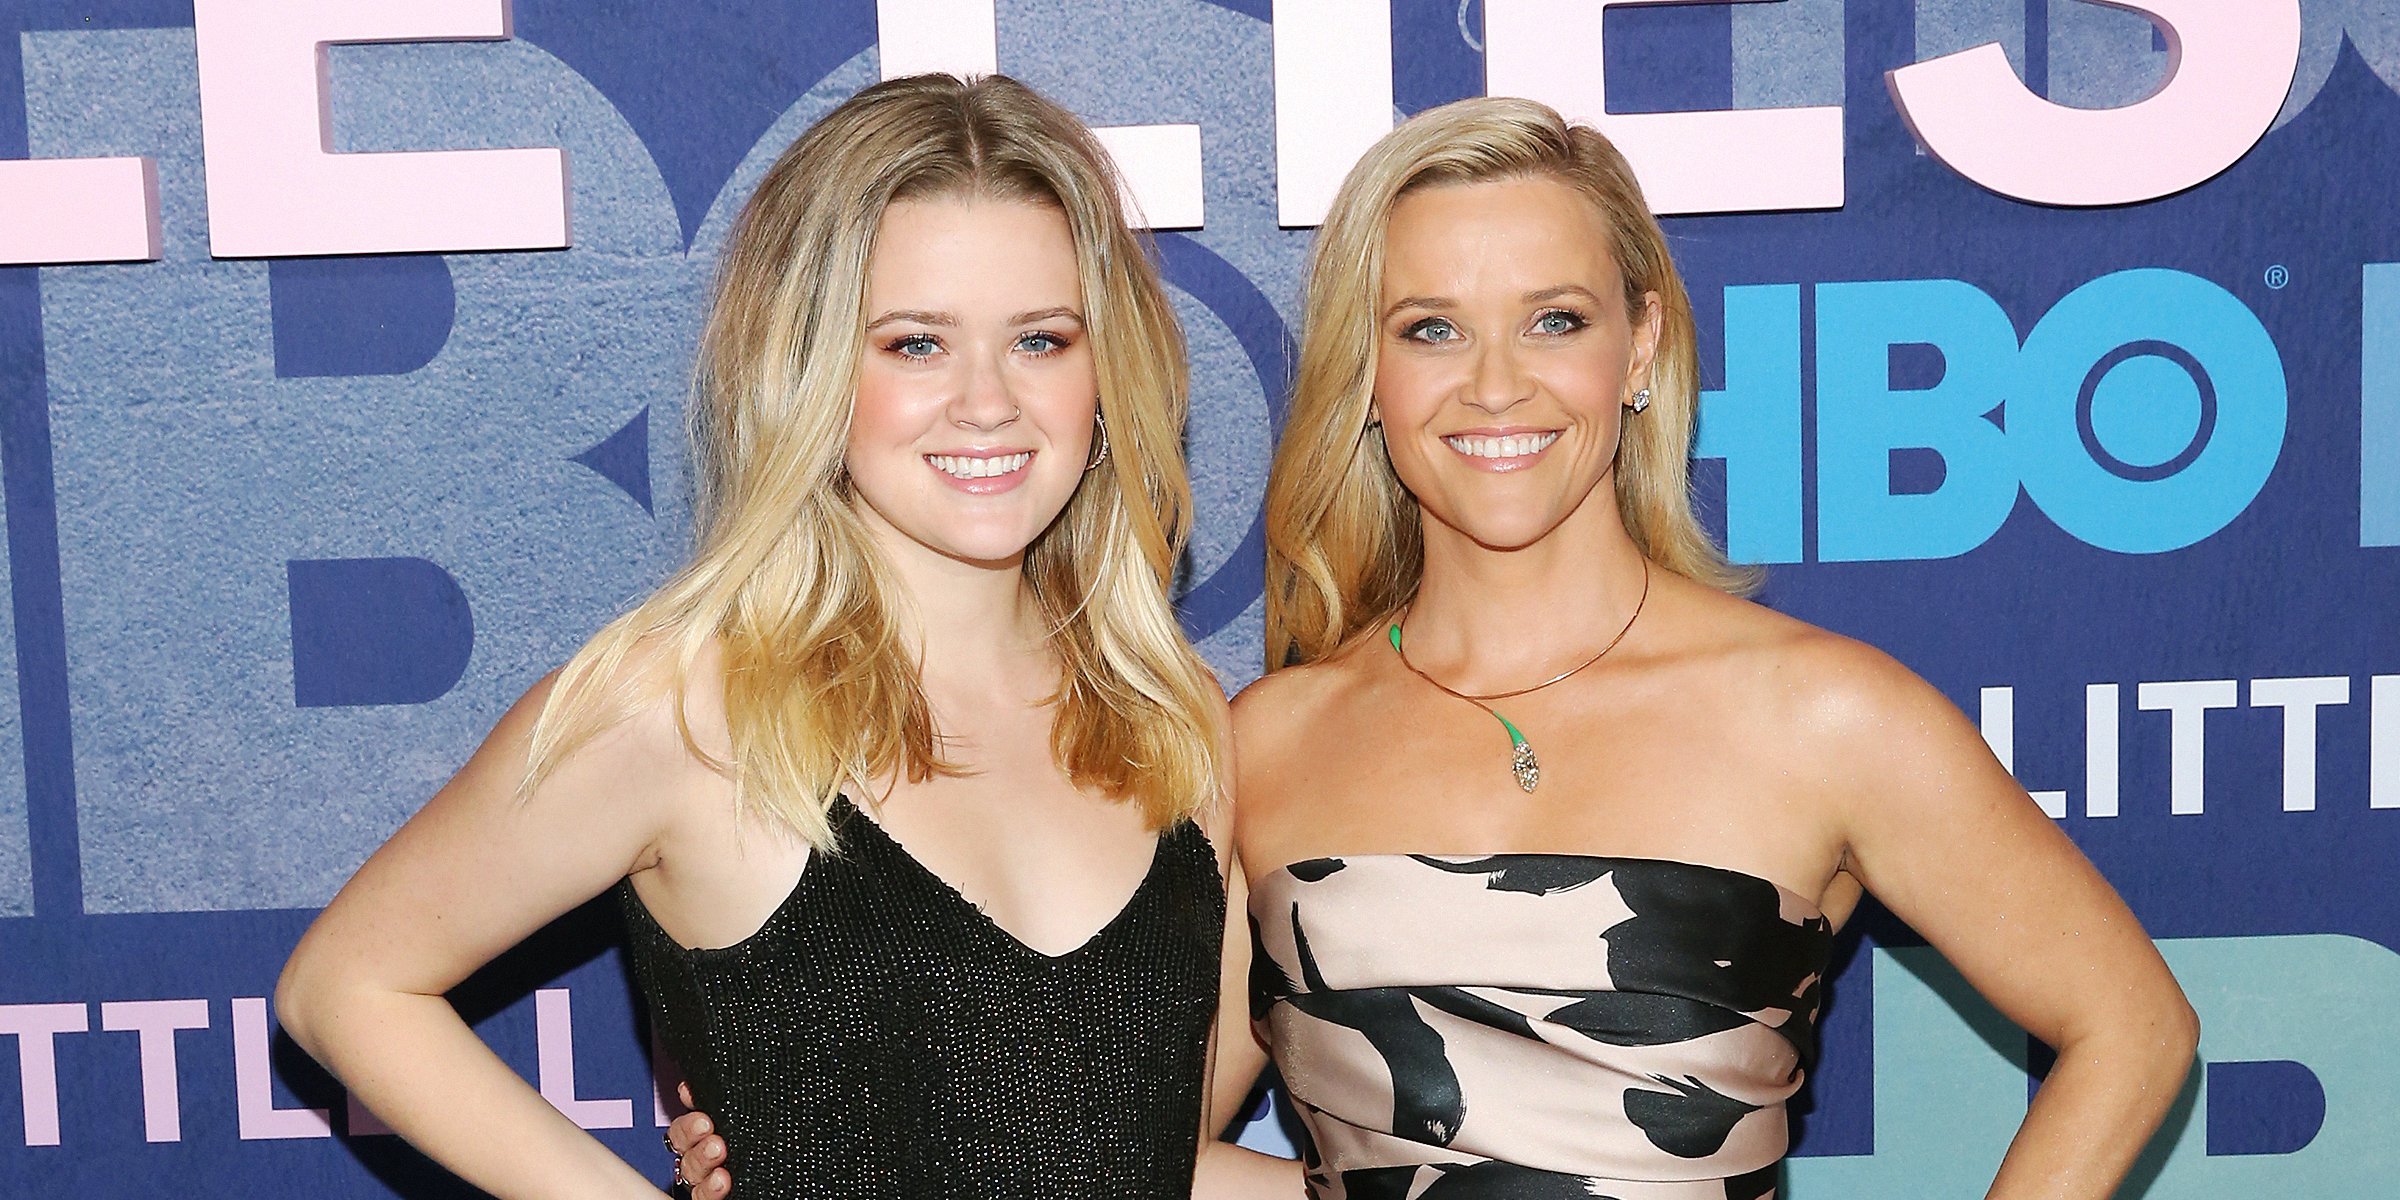 Ava Elizabeth Phillippe and Reese Witherspoon | Source: instagram.com/reesewitherspoon/